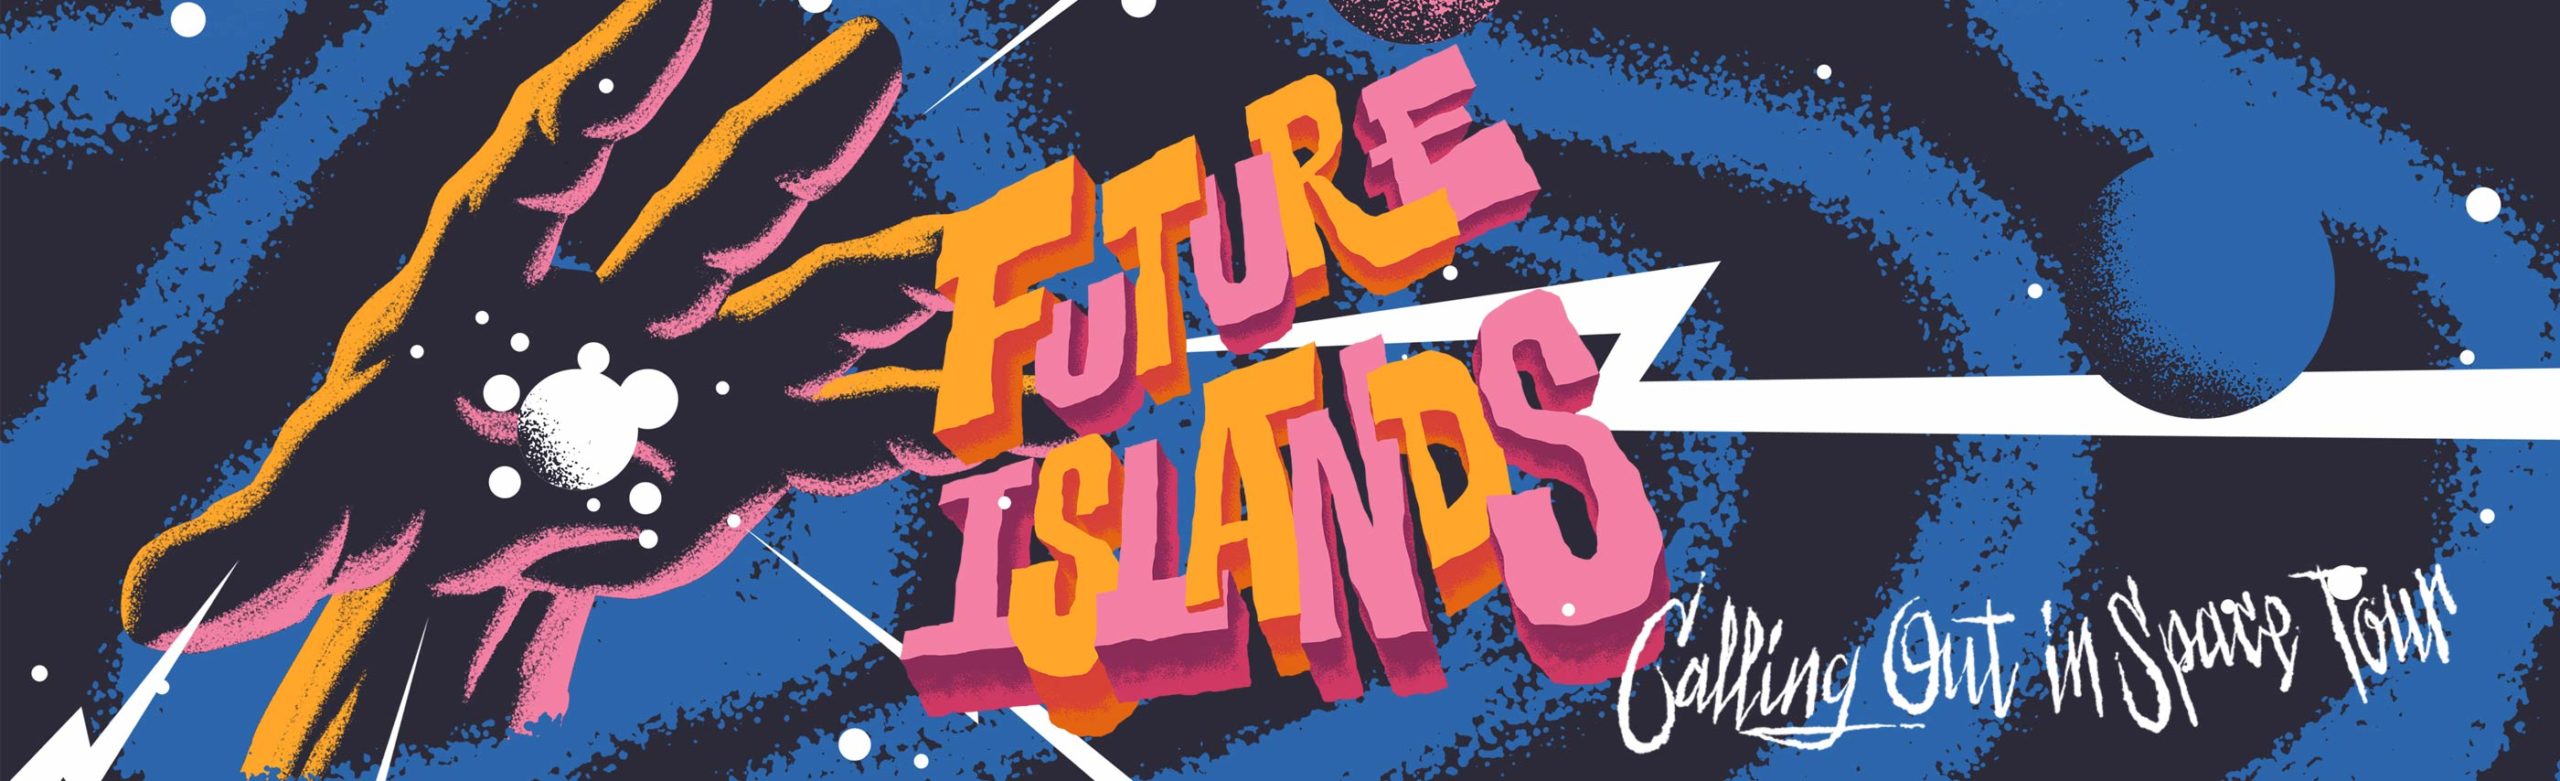 Event Info: Future Islands at the Wilma 2021 Image